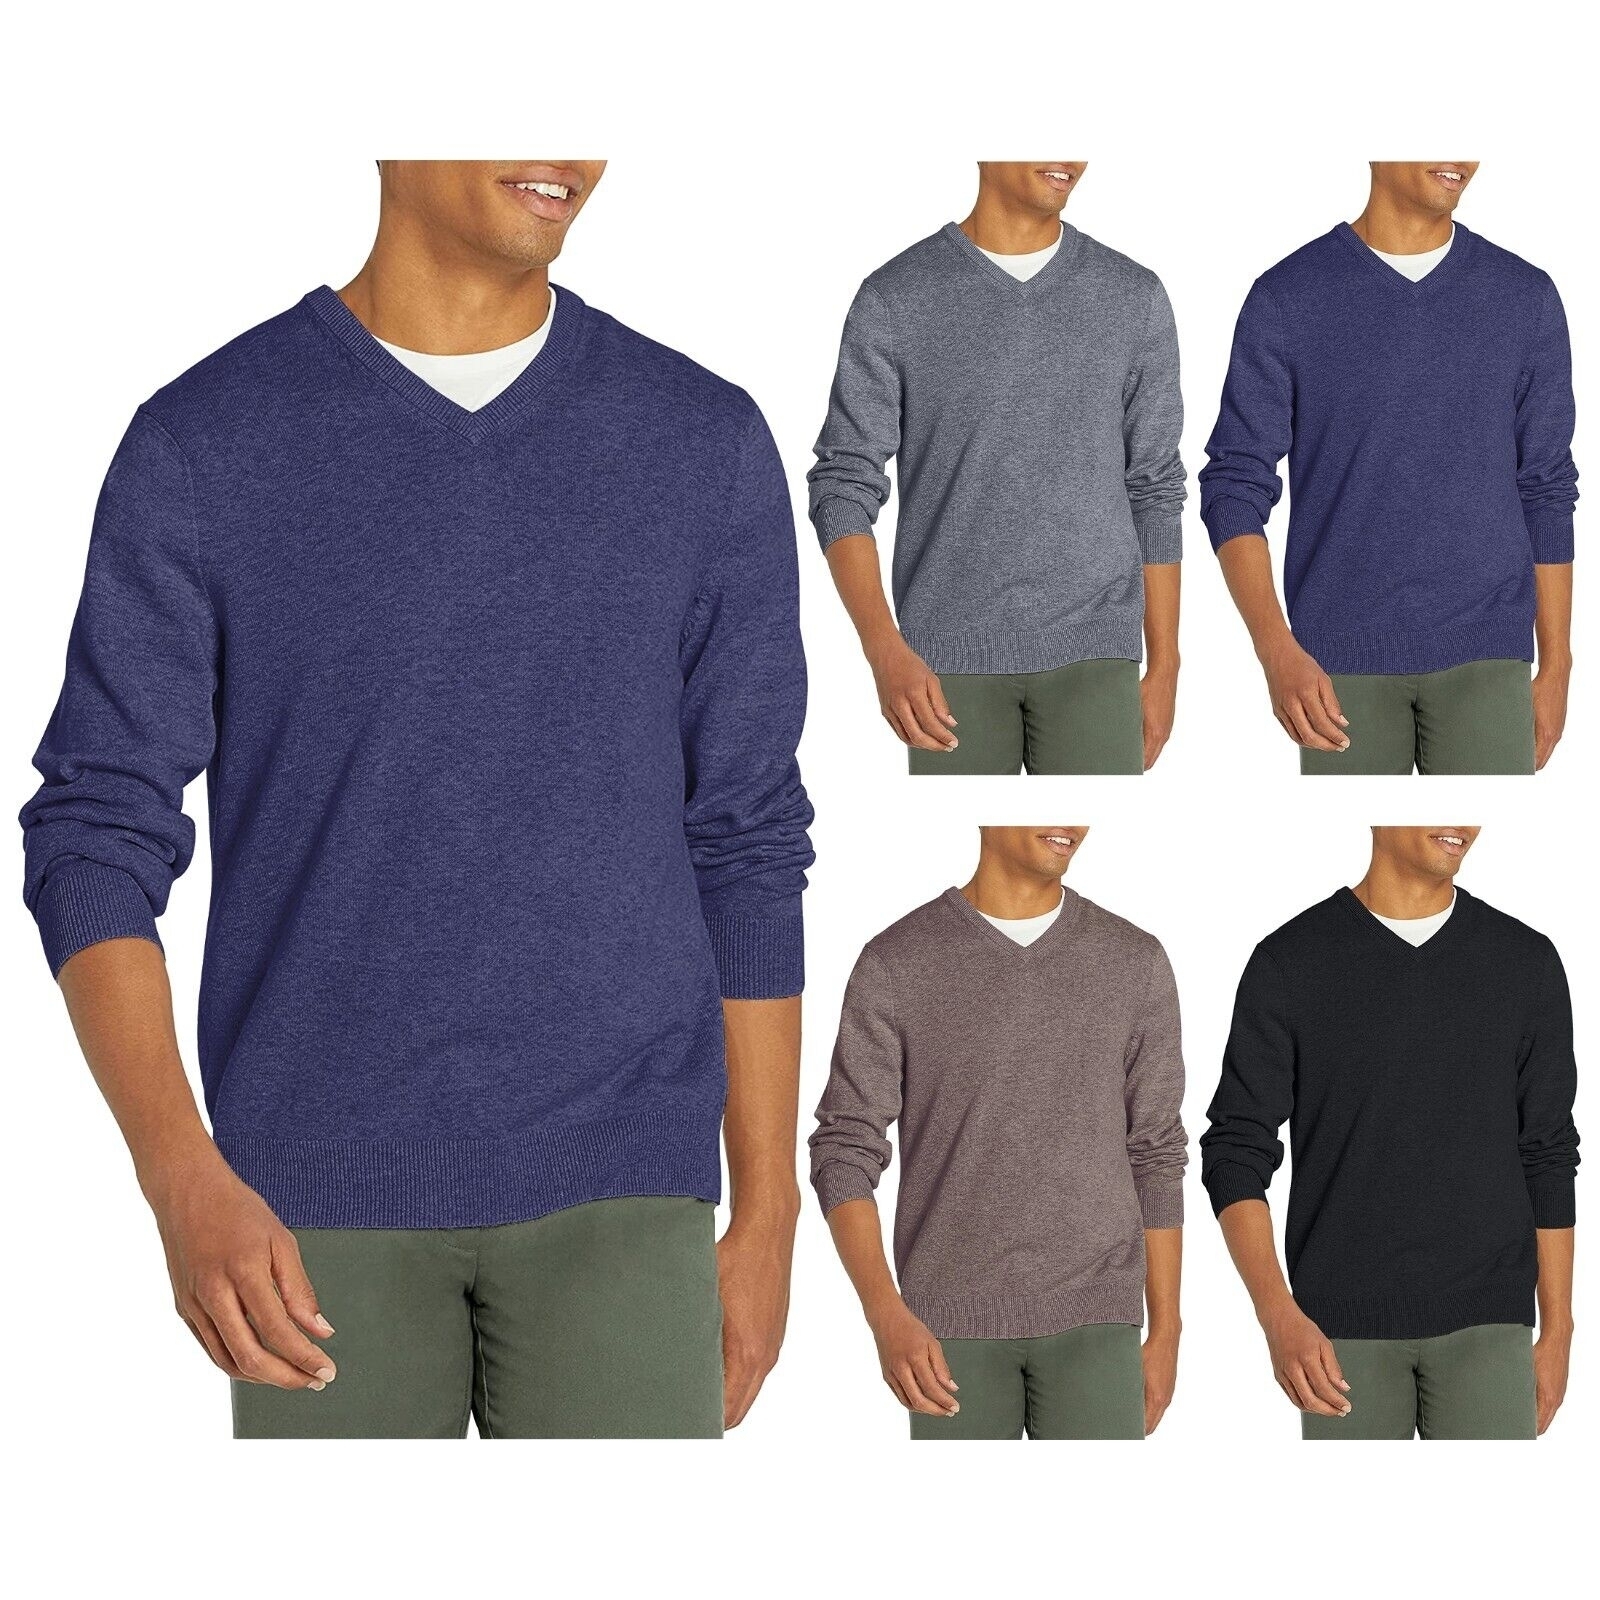 Multi-Pack Mens Cozy Comfy Ultra Soft Slim Fit Warm Knit Pullover V-Neck Sweater - 1, Small